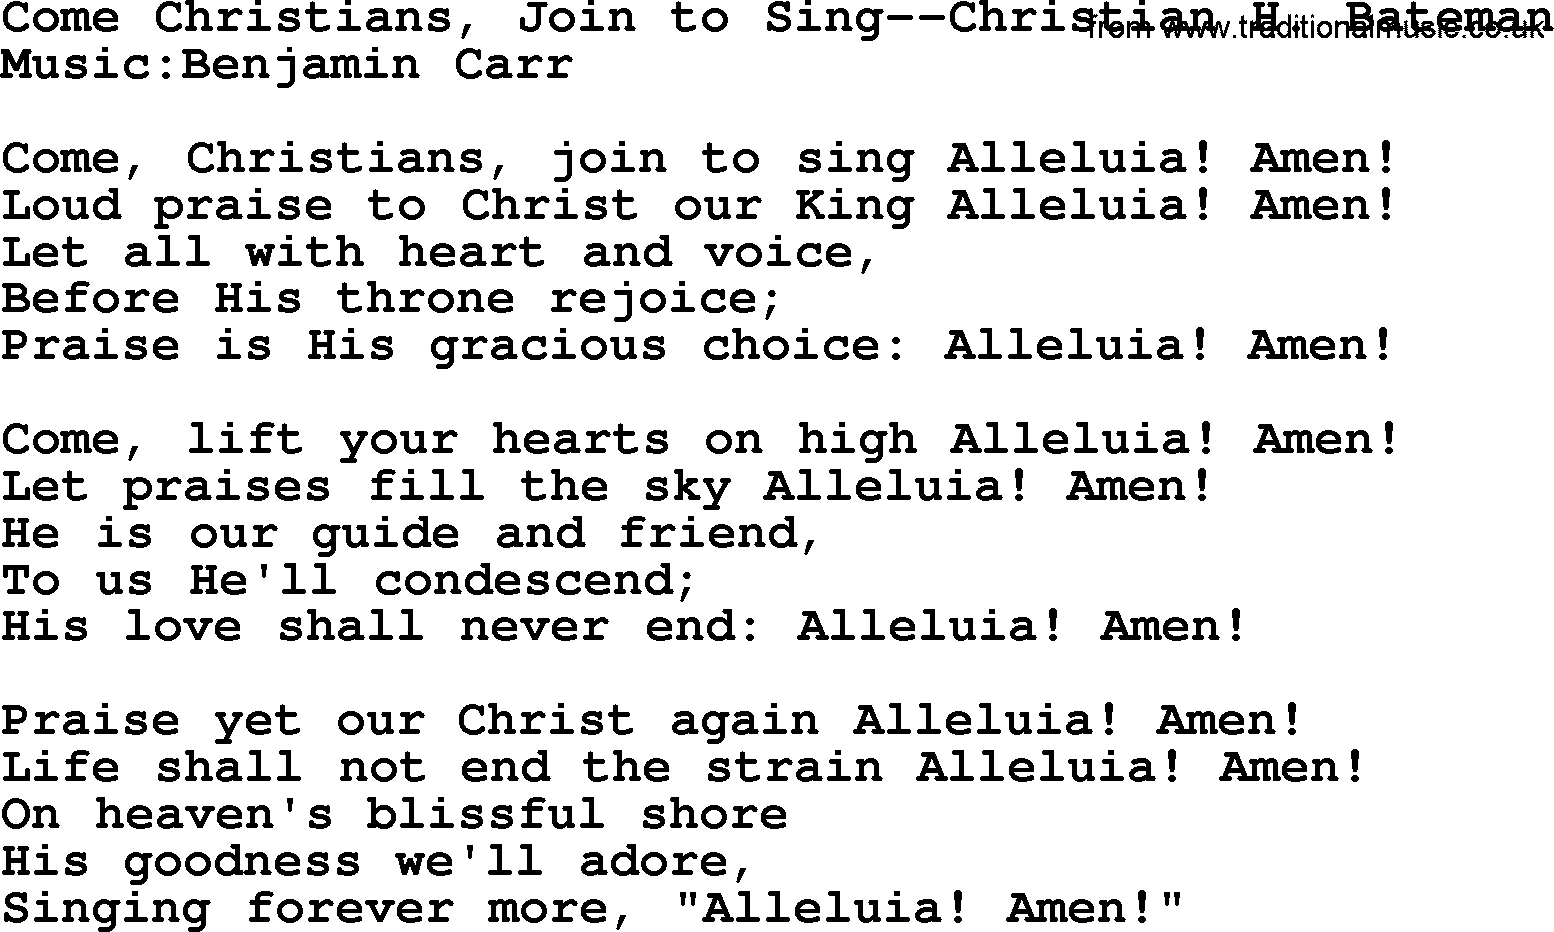 Ascensiontide Hynms collection, Hymn: Come Christians, Join To Sing-Christian H Bateman, lyrics and PDF